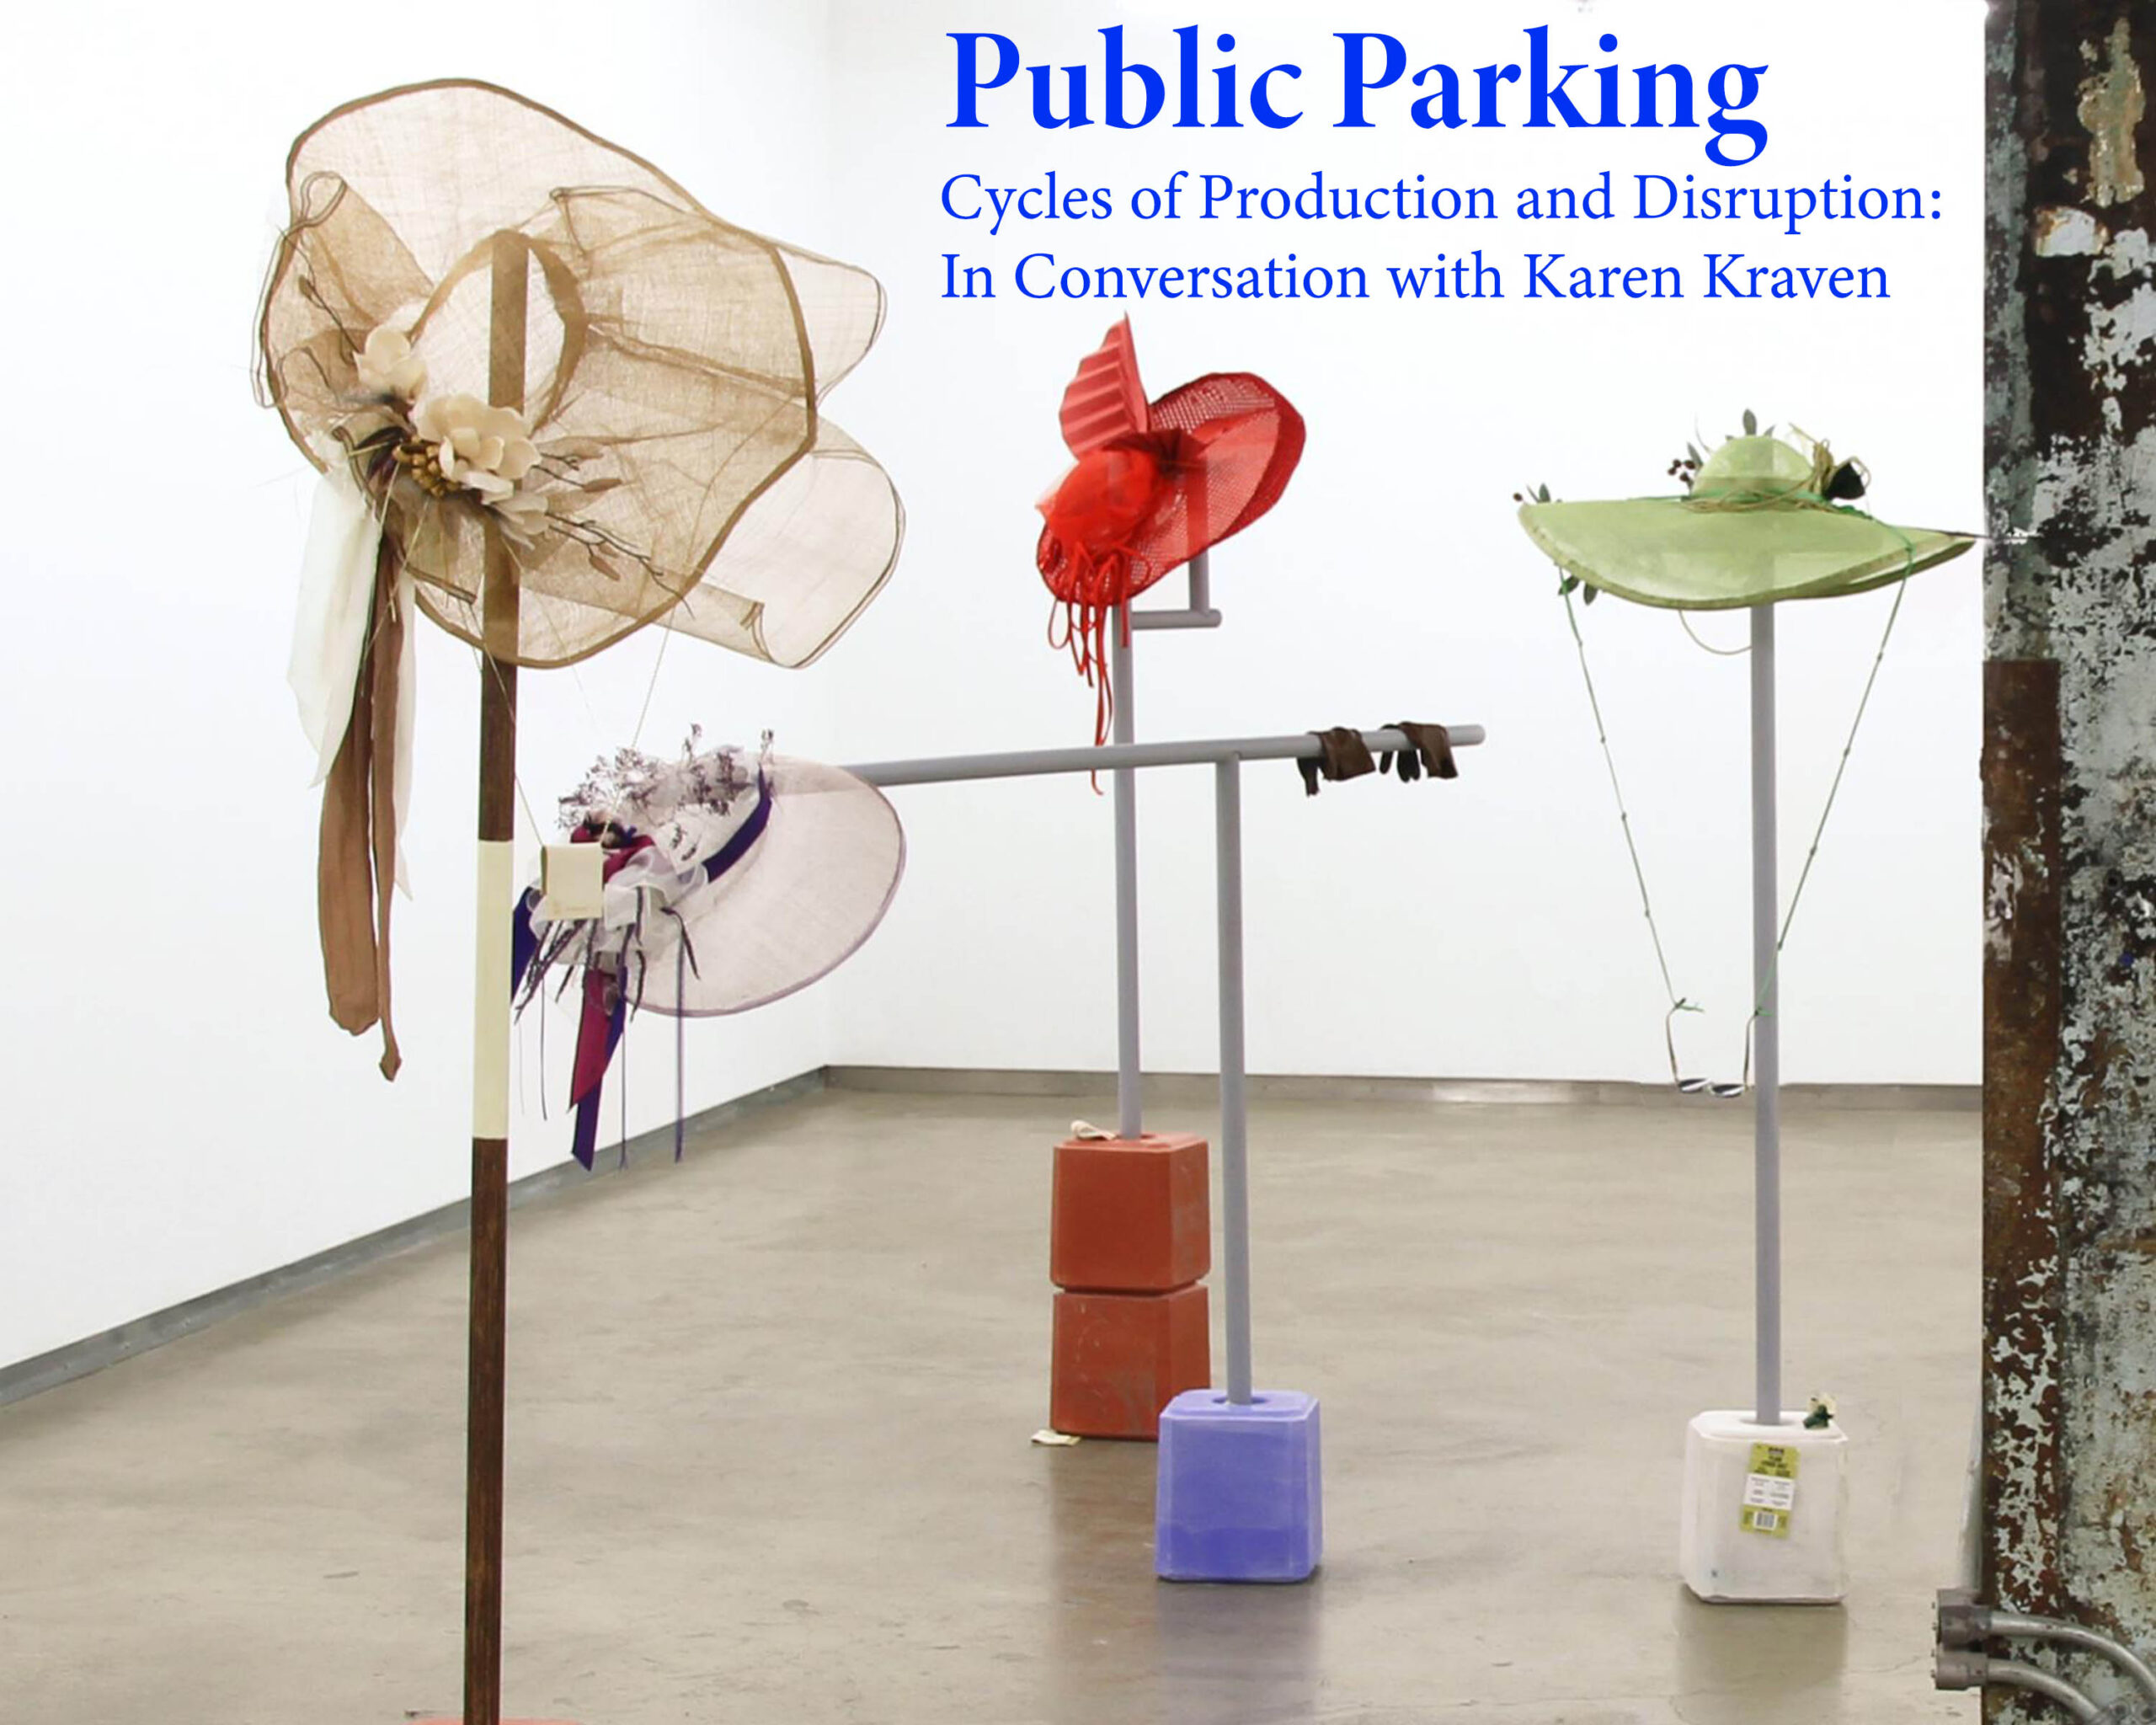 Public Parking, 2021 | Cycles of Production and Disruption: In Conversation with Karen Kraven